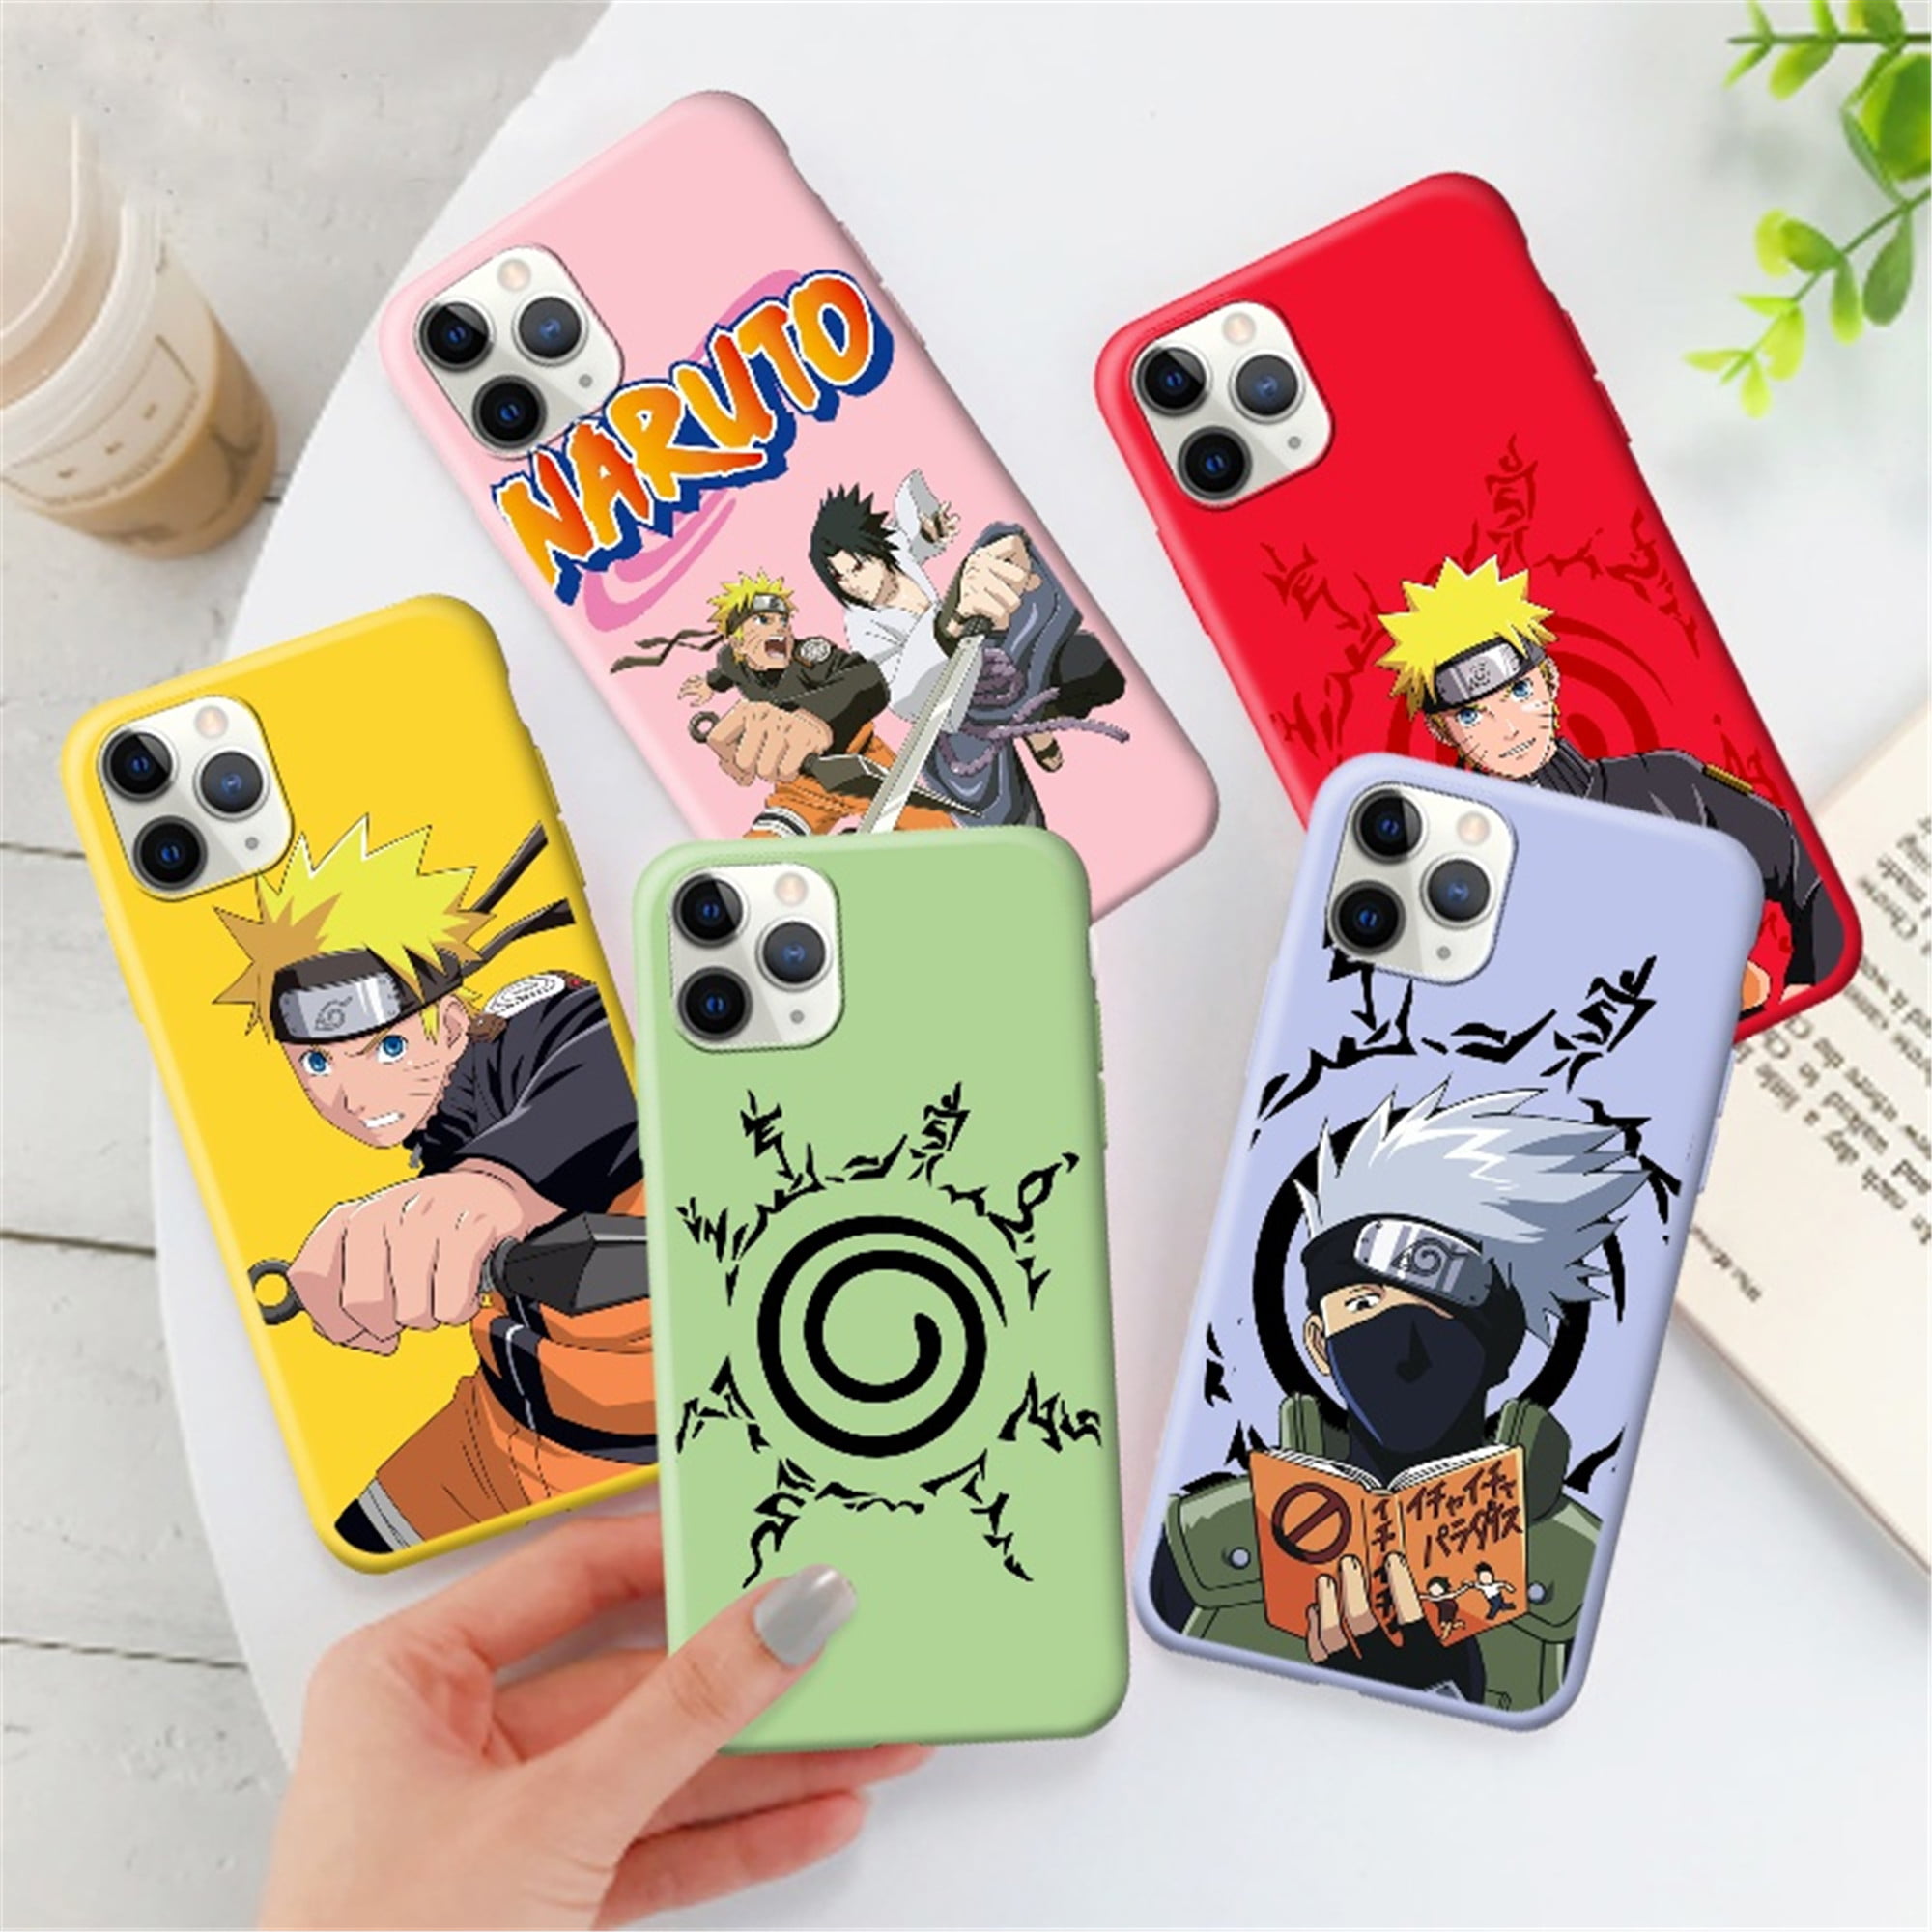 iPhone Case iPhone Designer Silicone 12/13 Pro Max Case AirPods 1st/2nd/Pro iPhone Anime Cartoon Case